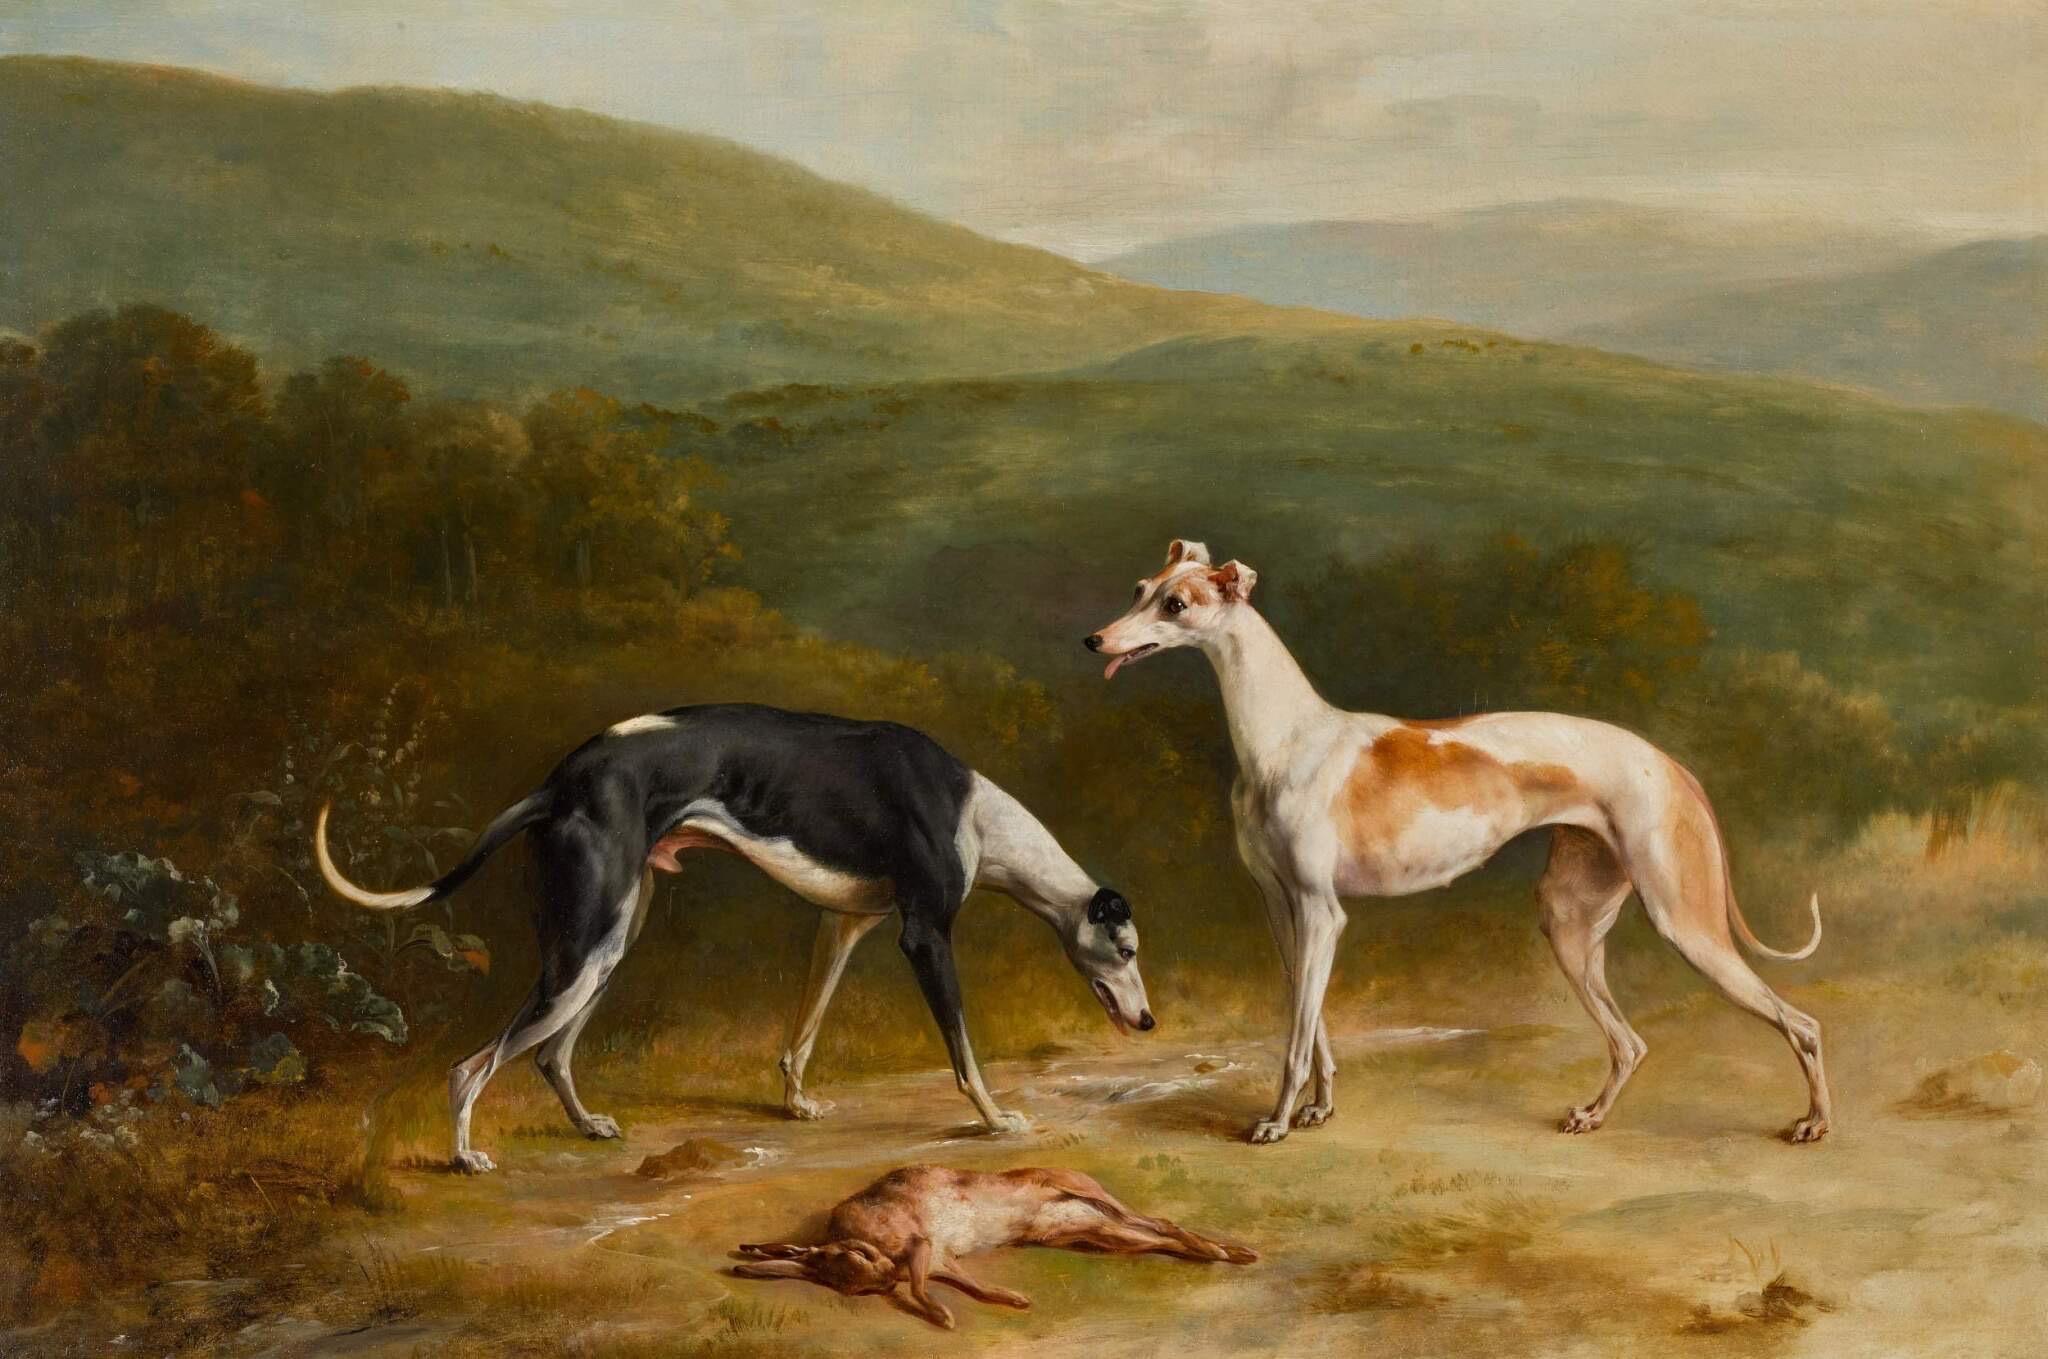 18th century portrait of two greyhound dogs in an extensive landscape - Painting by Philip Reinagle 